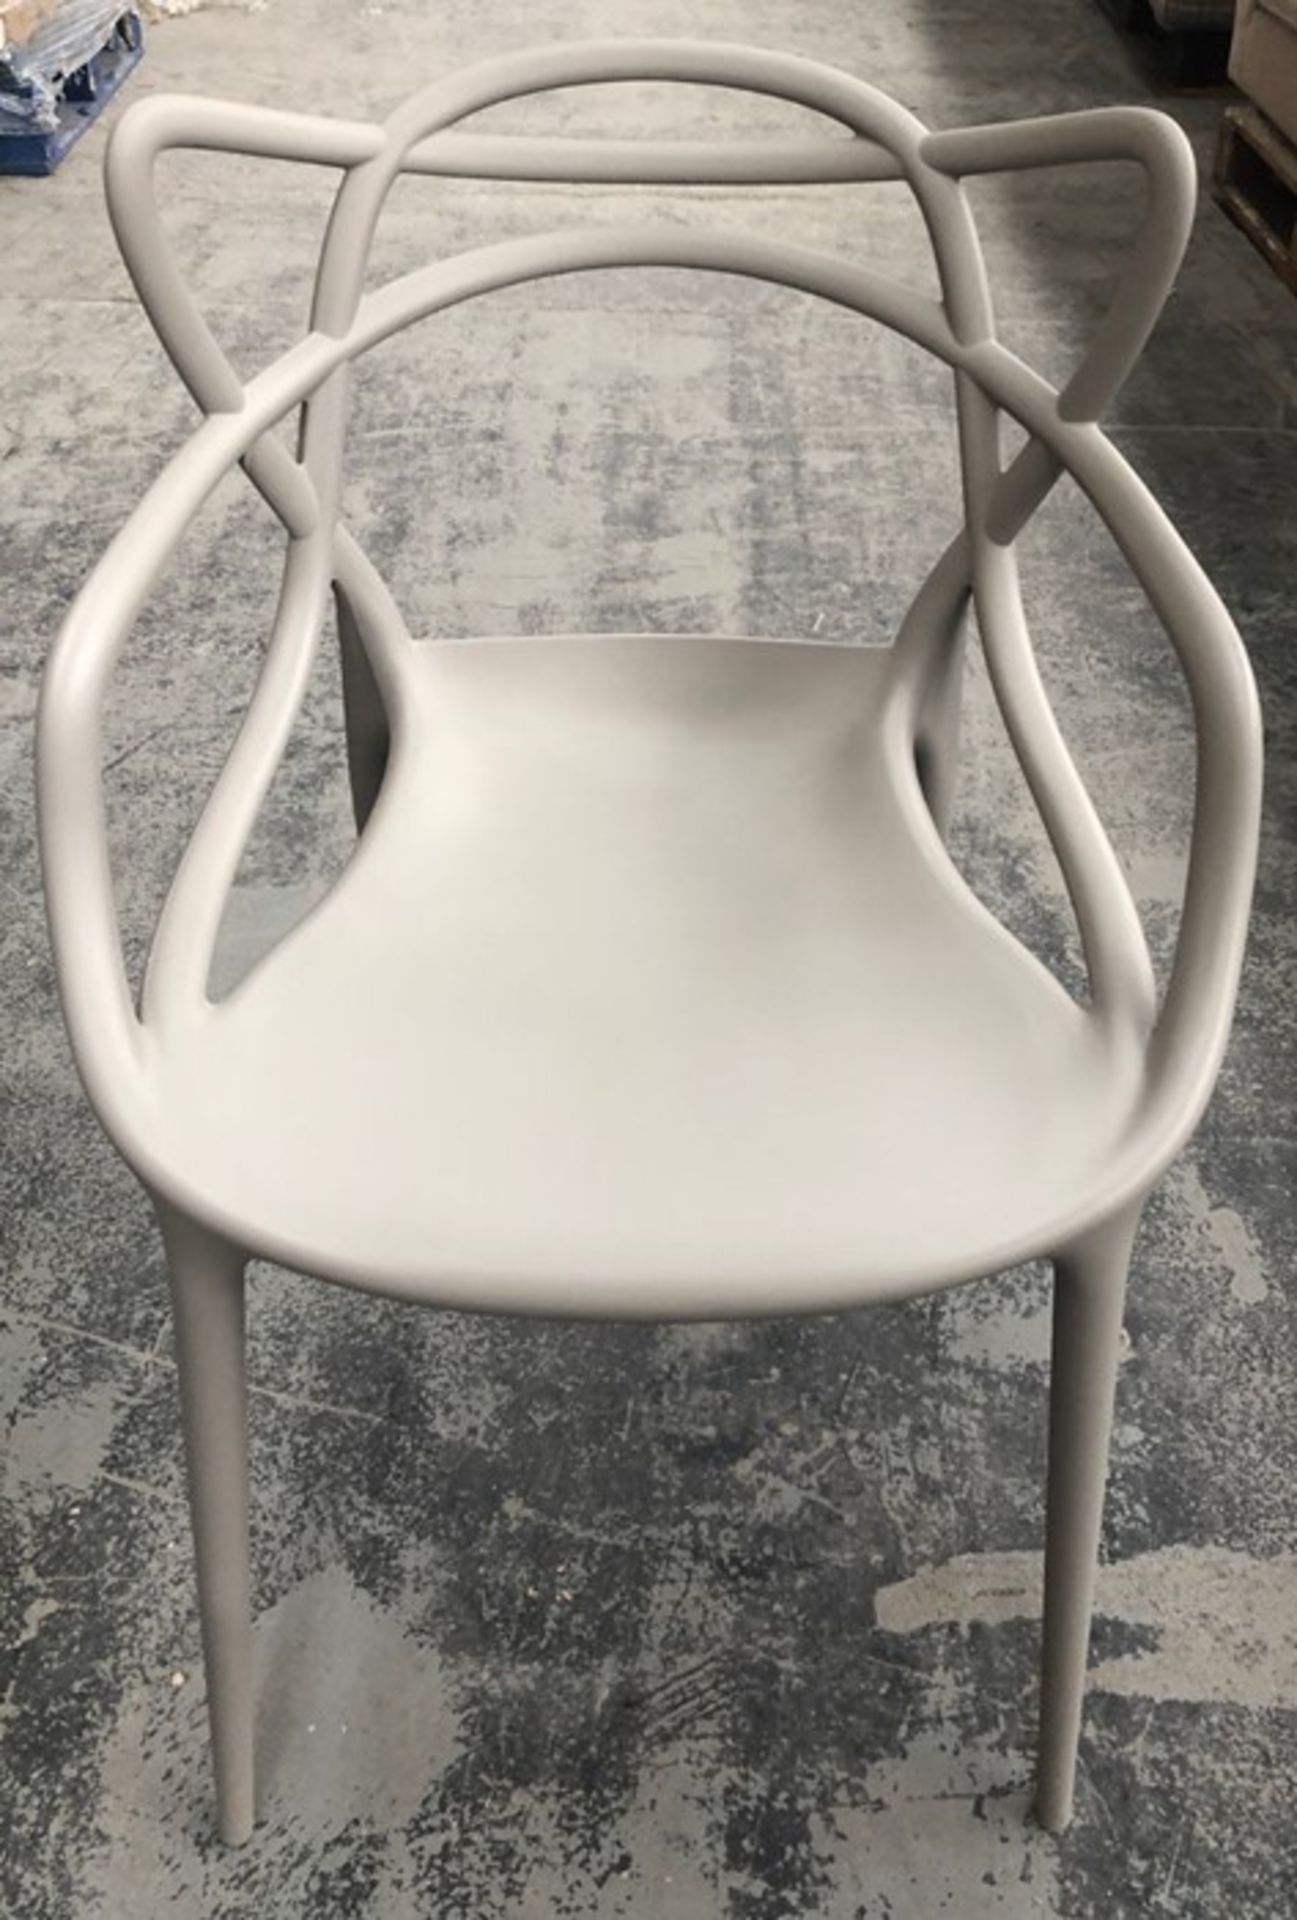 PHILIPPE STARCK FOR KARTELL MASTERS CHAIR - GREY